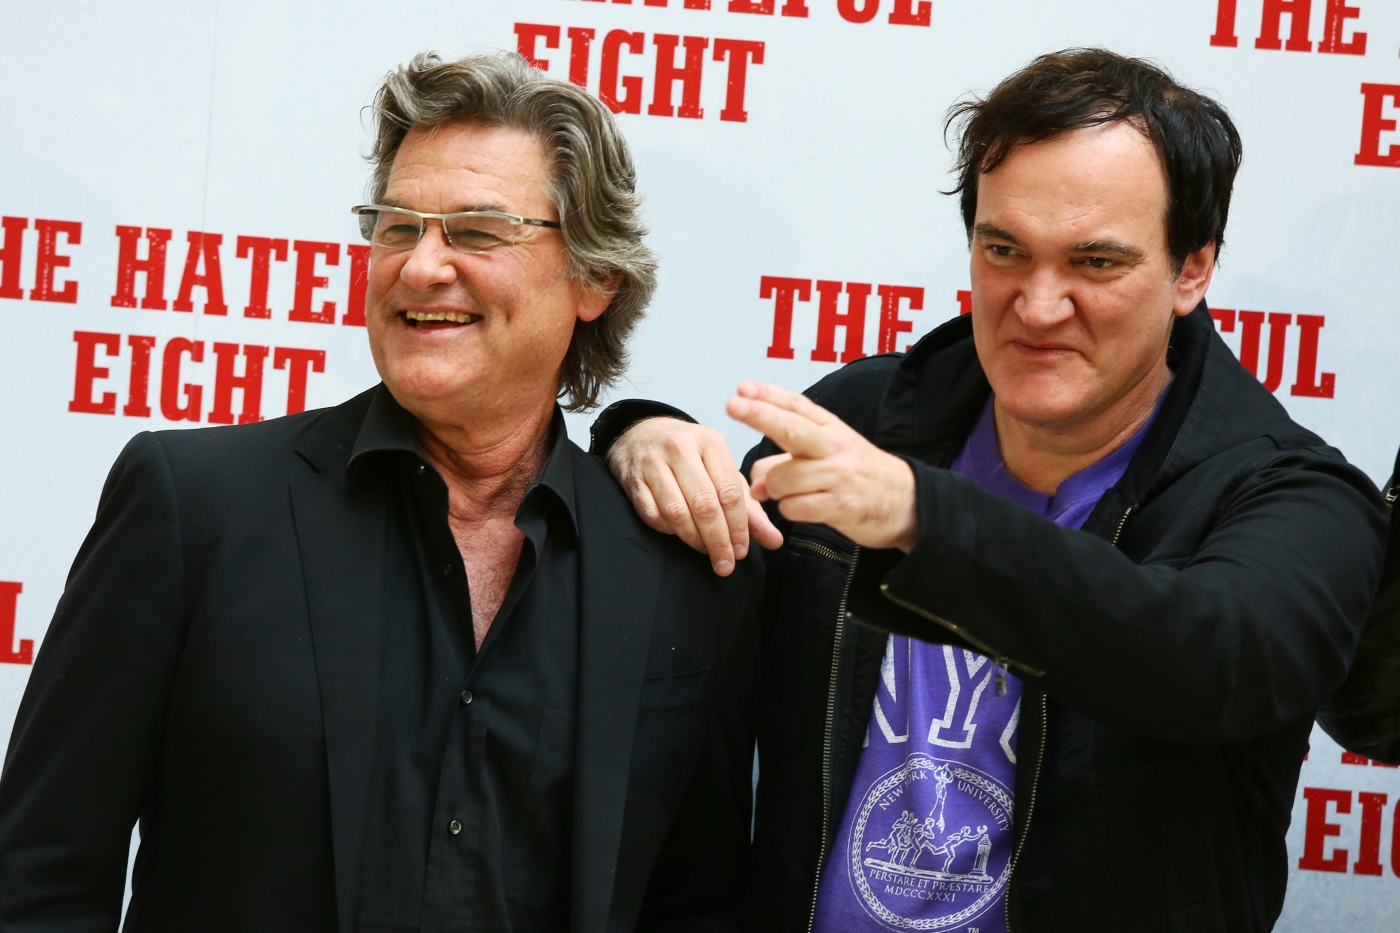 Kurt Russell and Quentin Tarantino attend the 'The Hateful Eight' photocall